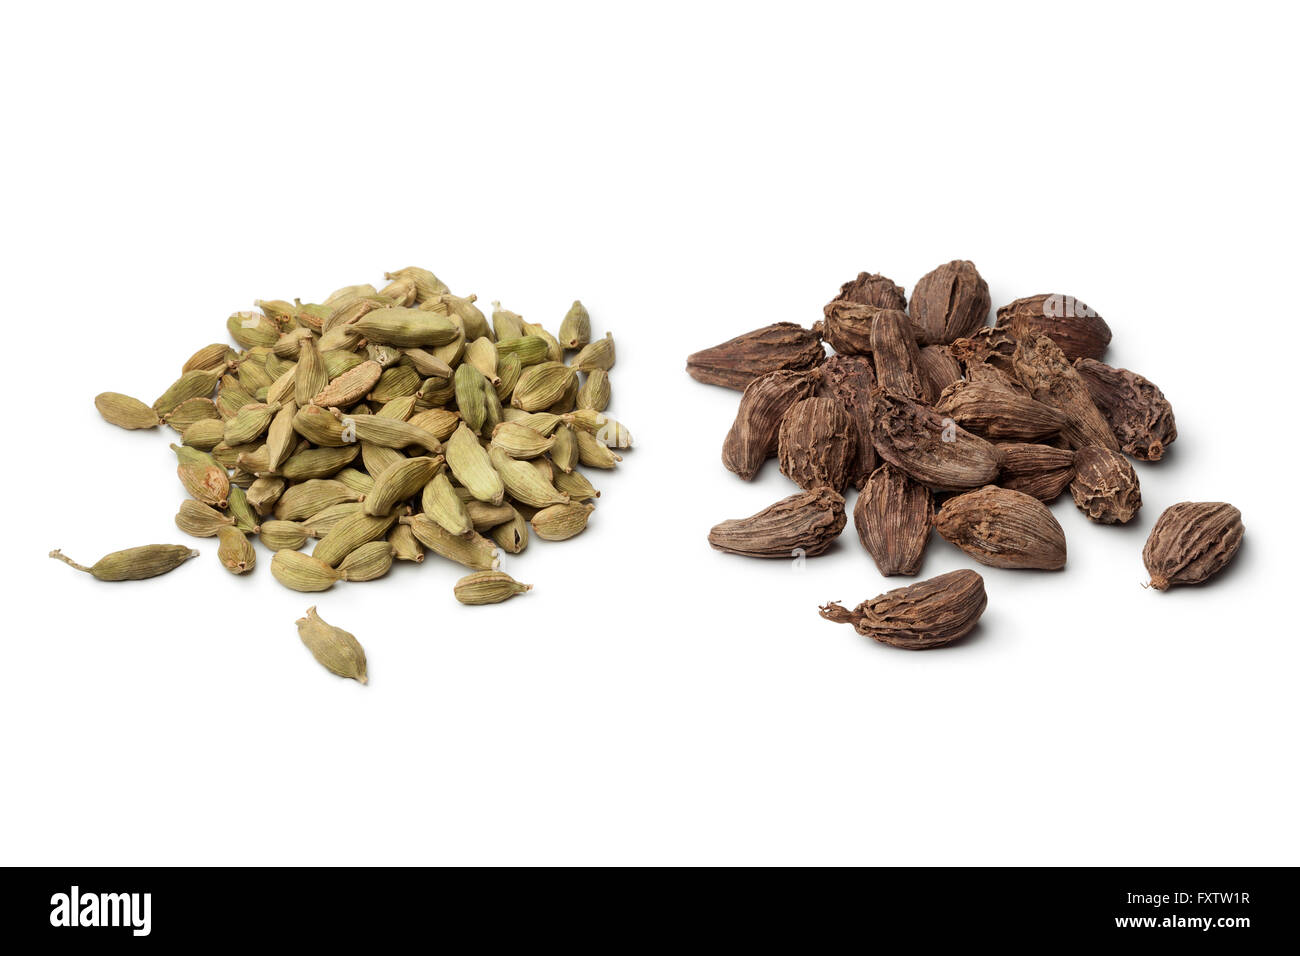 Heaps of green and large black Cardamom seeds on white background Stock Photo